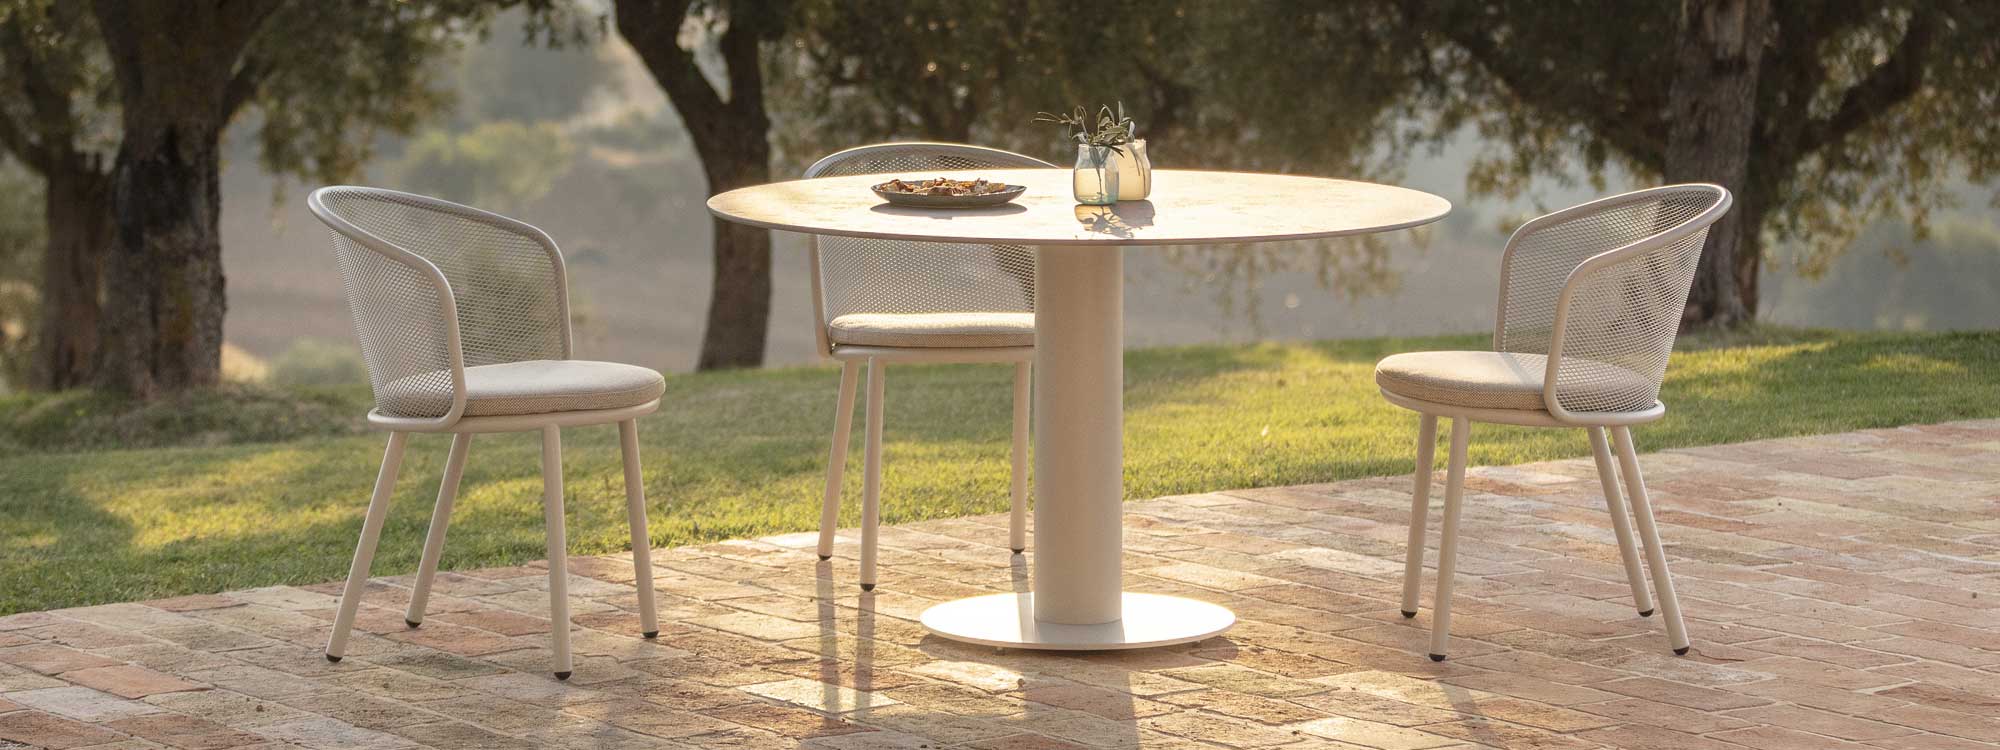 Image of white Branta circular outdoor table and Baza garden chair in warm evening sunlight